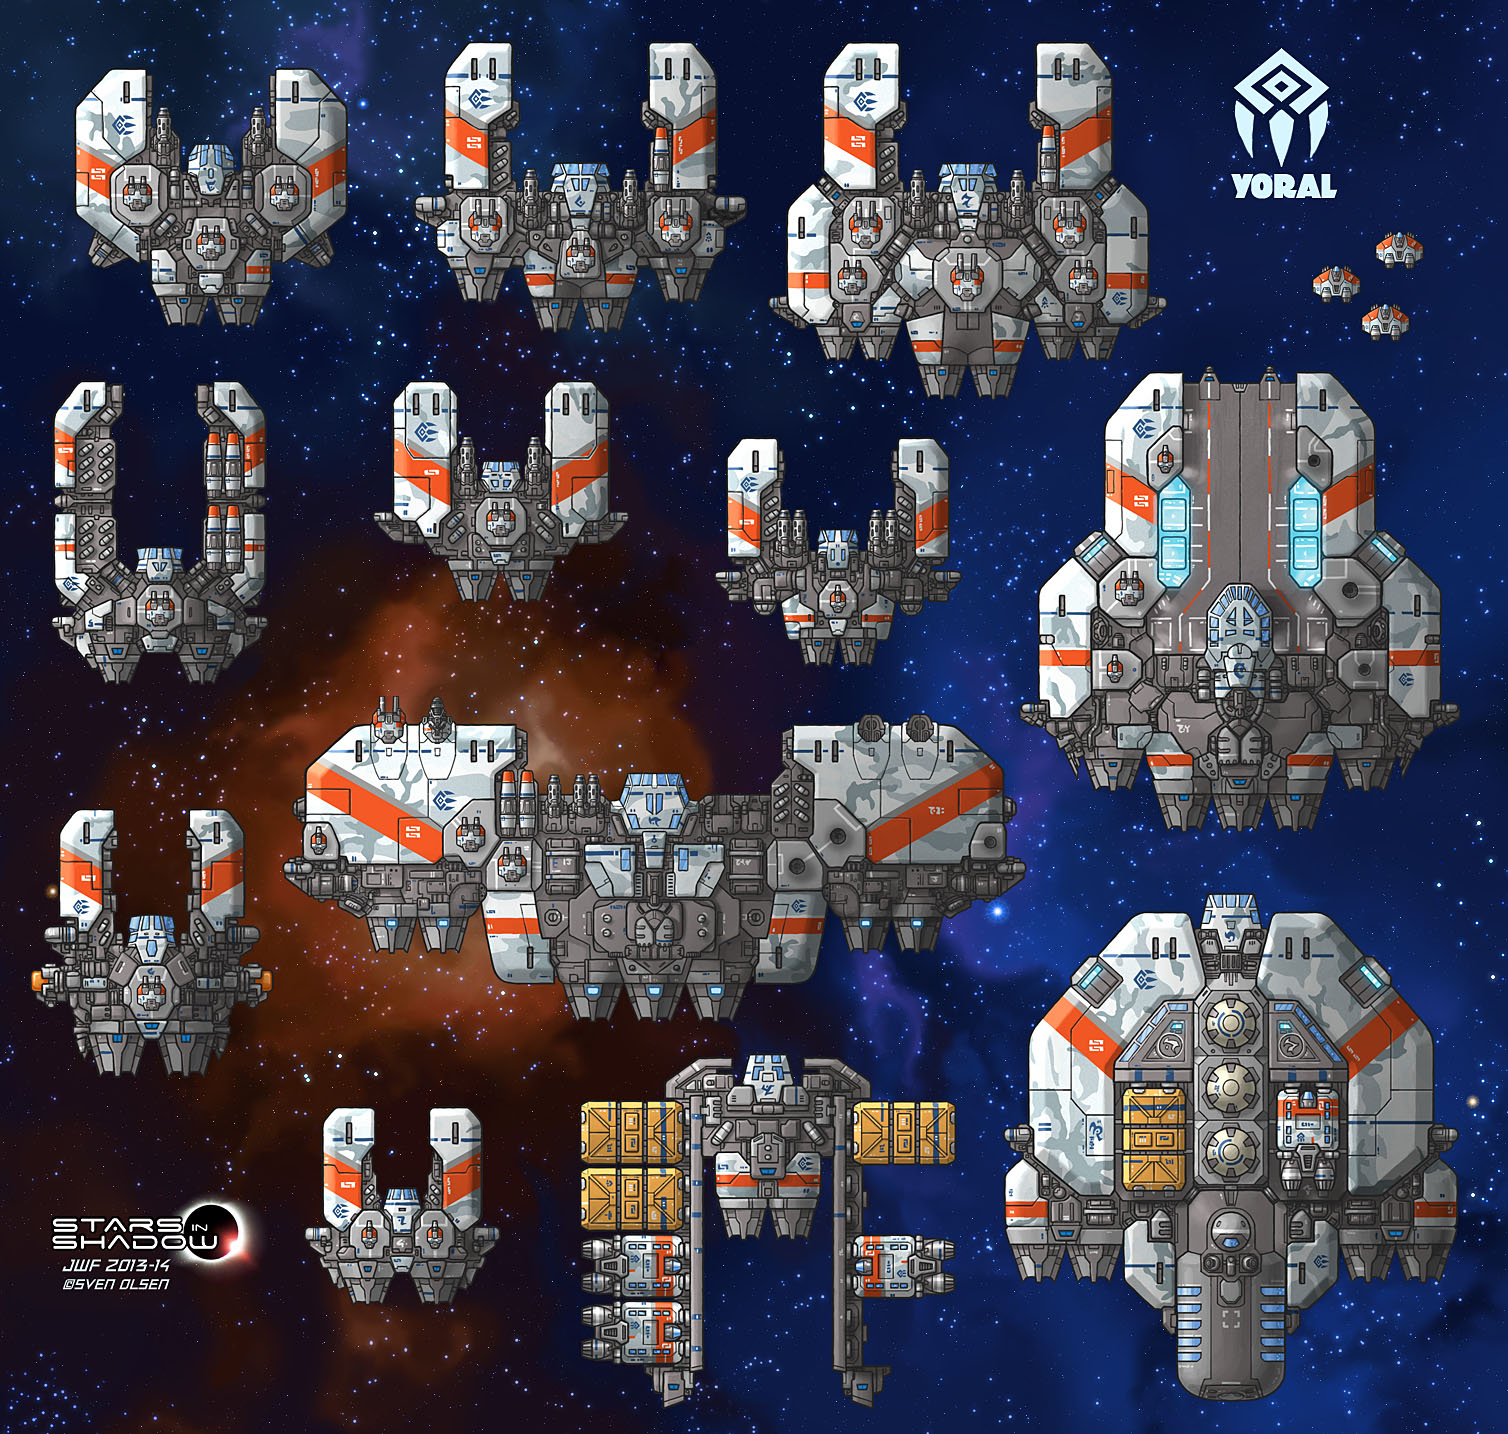 Stars in Shadow: Yoral Ships